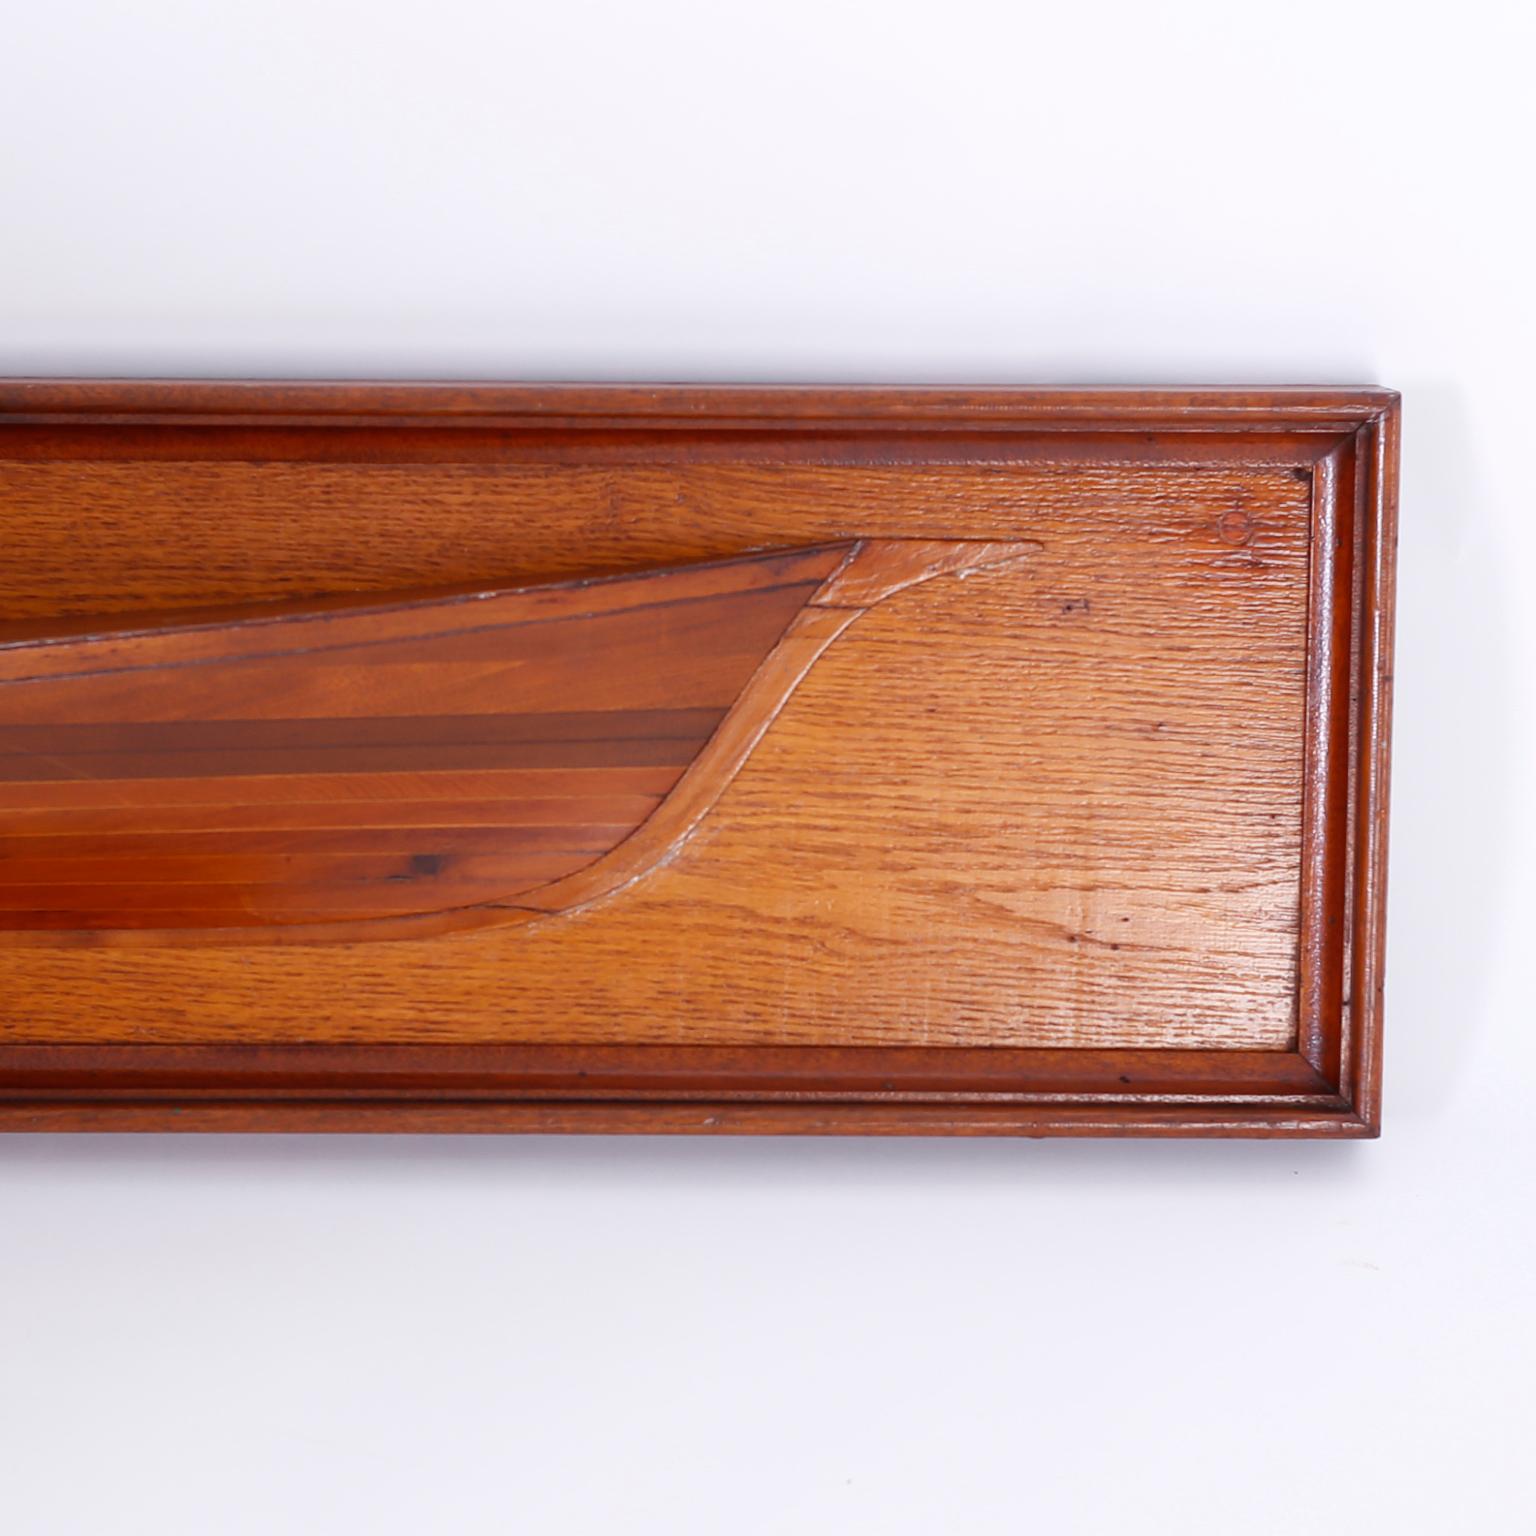 Antique half haul boat model crafted in mahogany with a mahogany frame and presented on a red oak background.